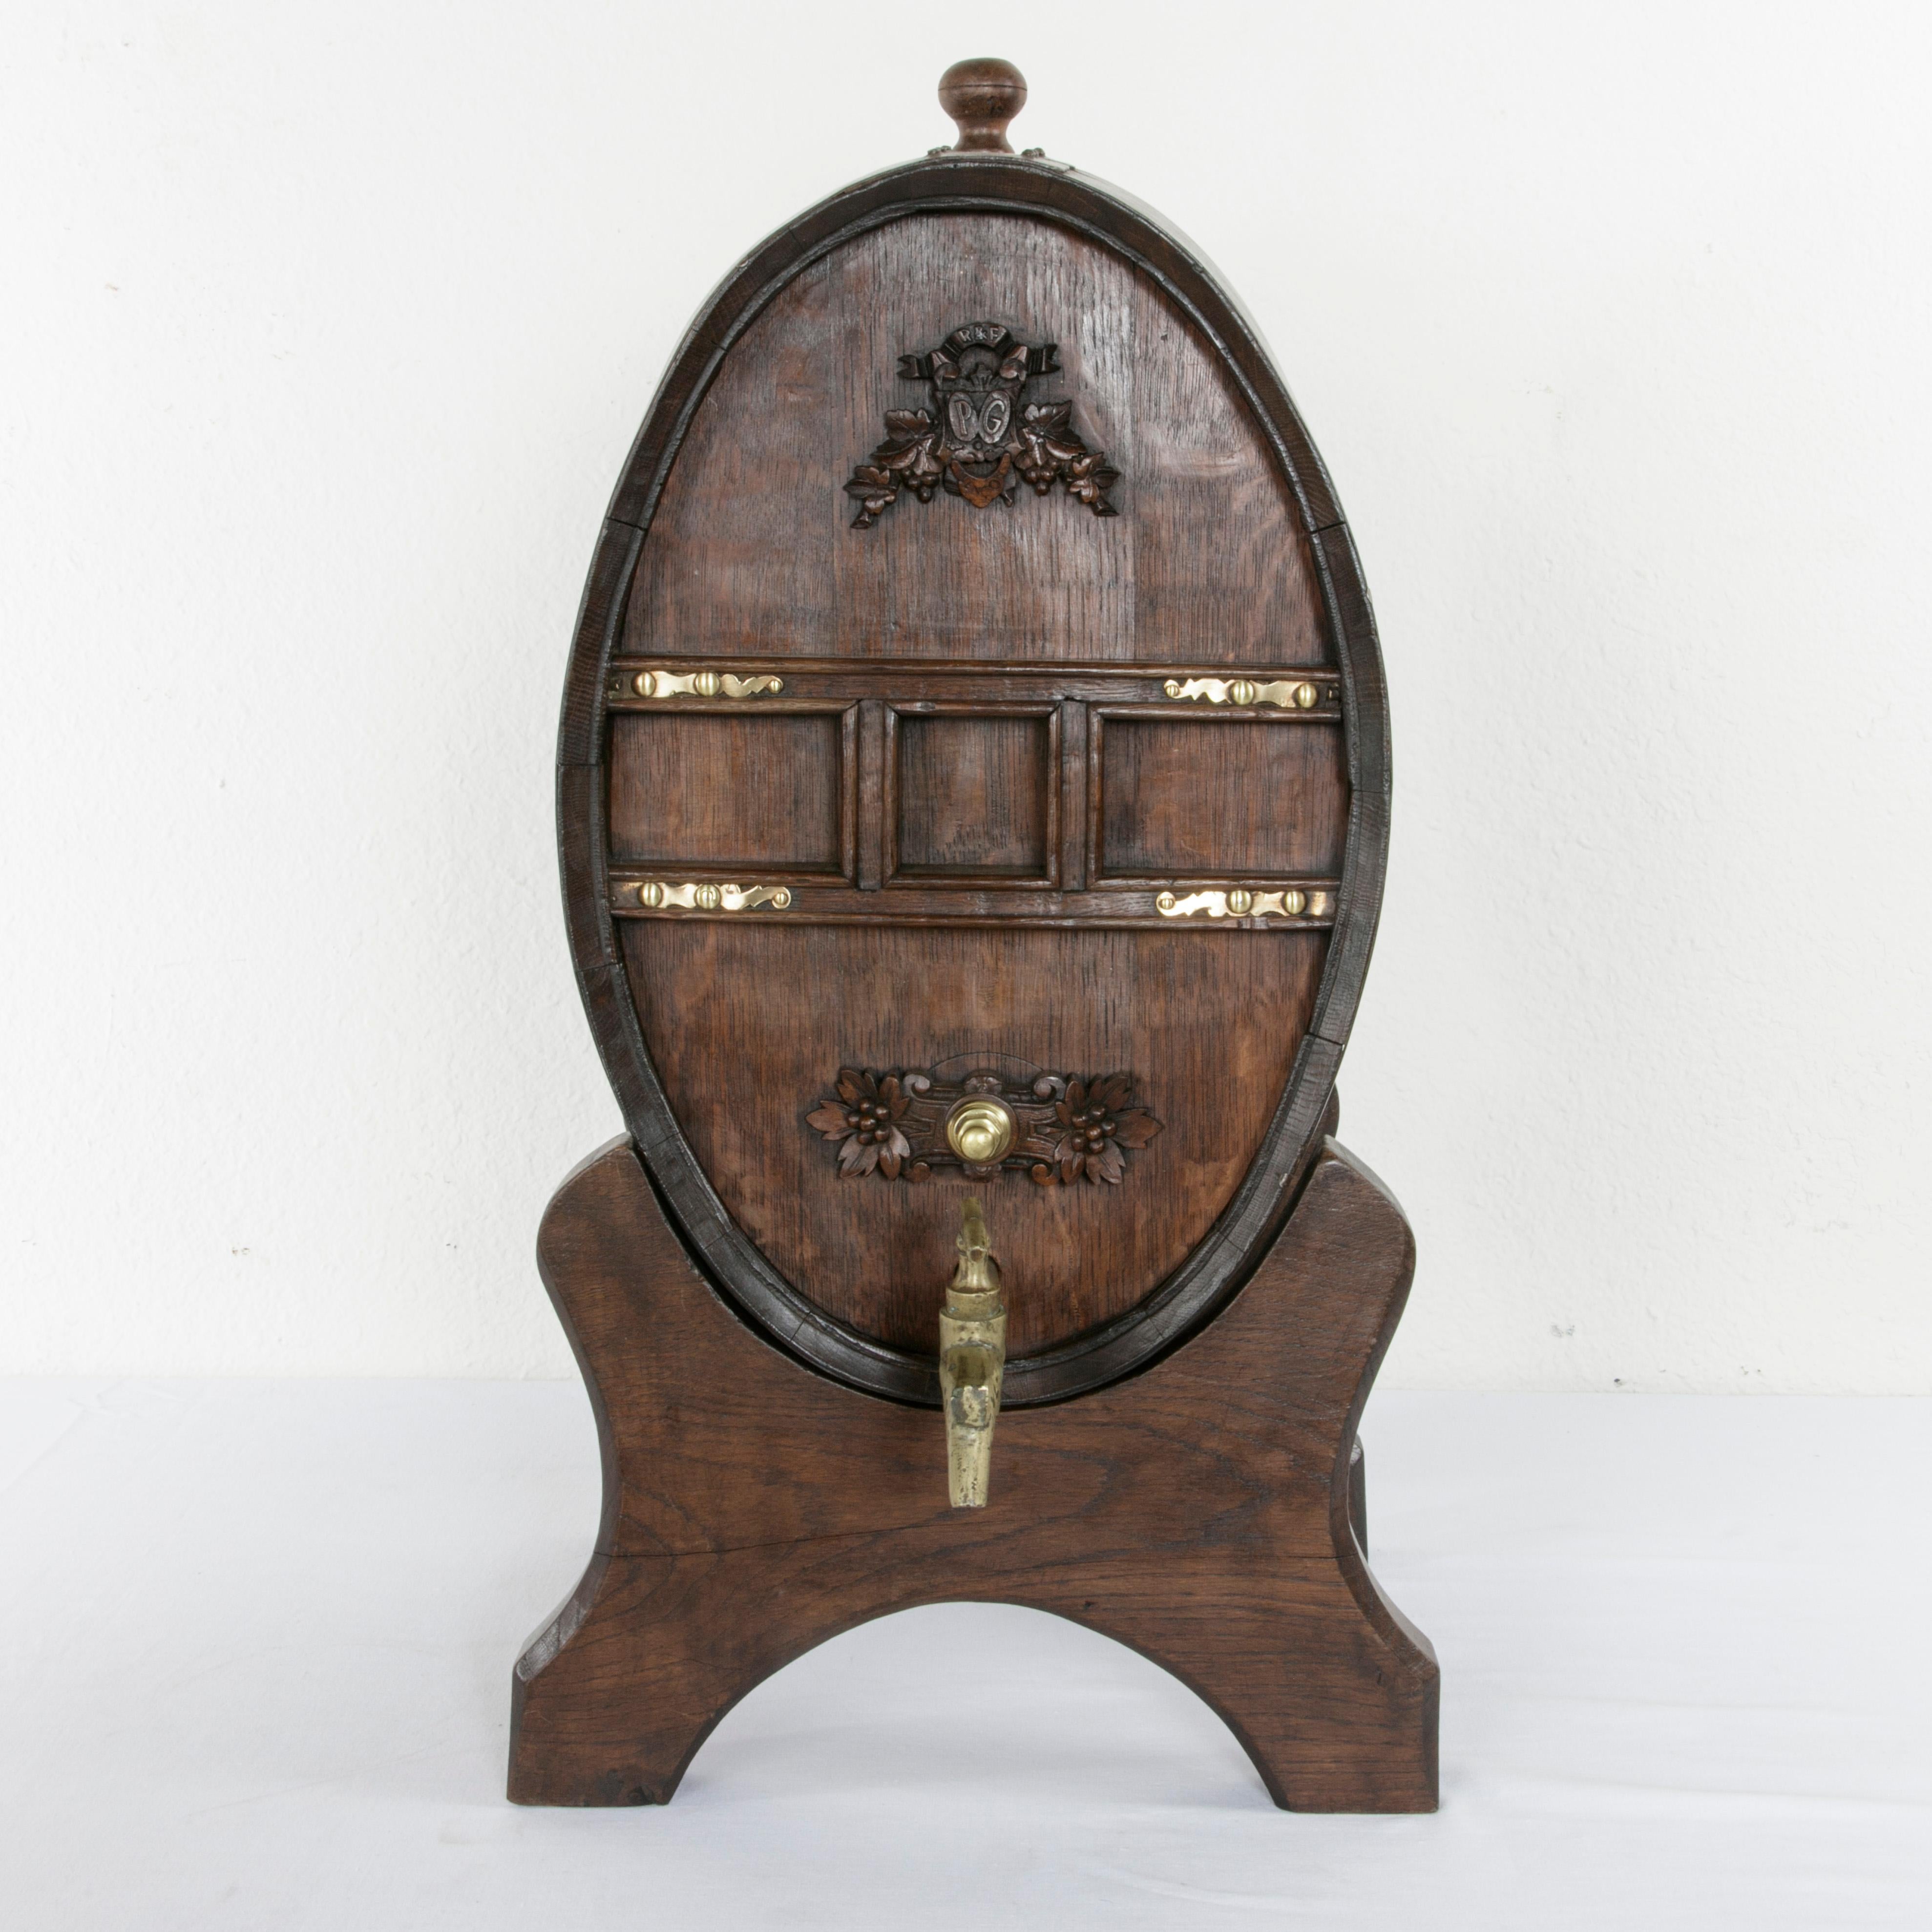 This mid-19th century artisan-made oak barrel was originally used for calvados, a regional specialty apple brandy in Normandy, France. Resting on a wooden Stand, this barrel features a hand carved cartouche and banner surrounded by grape leaves. The